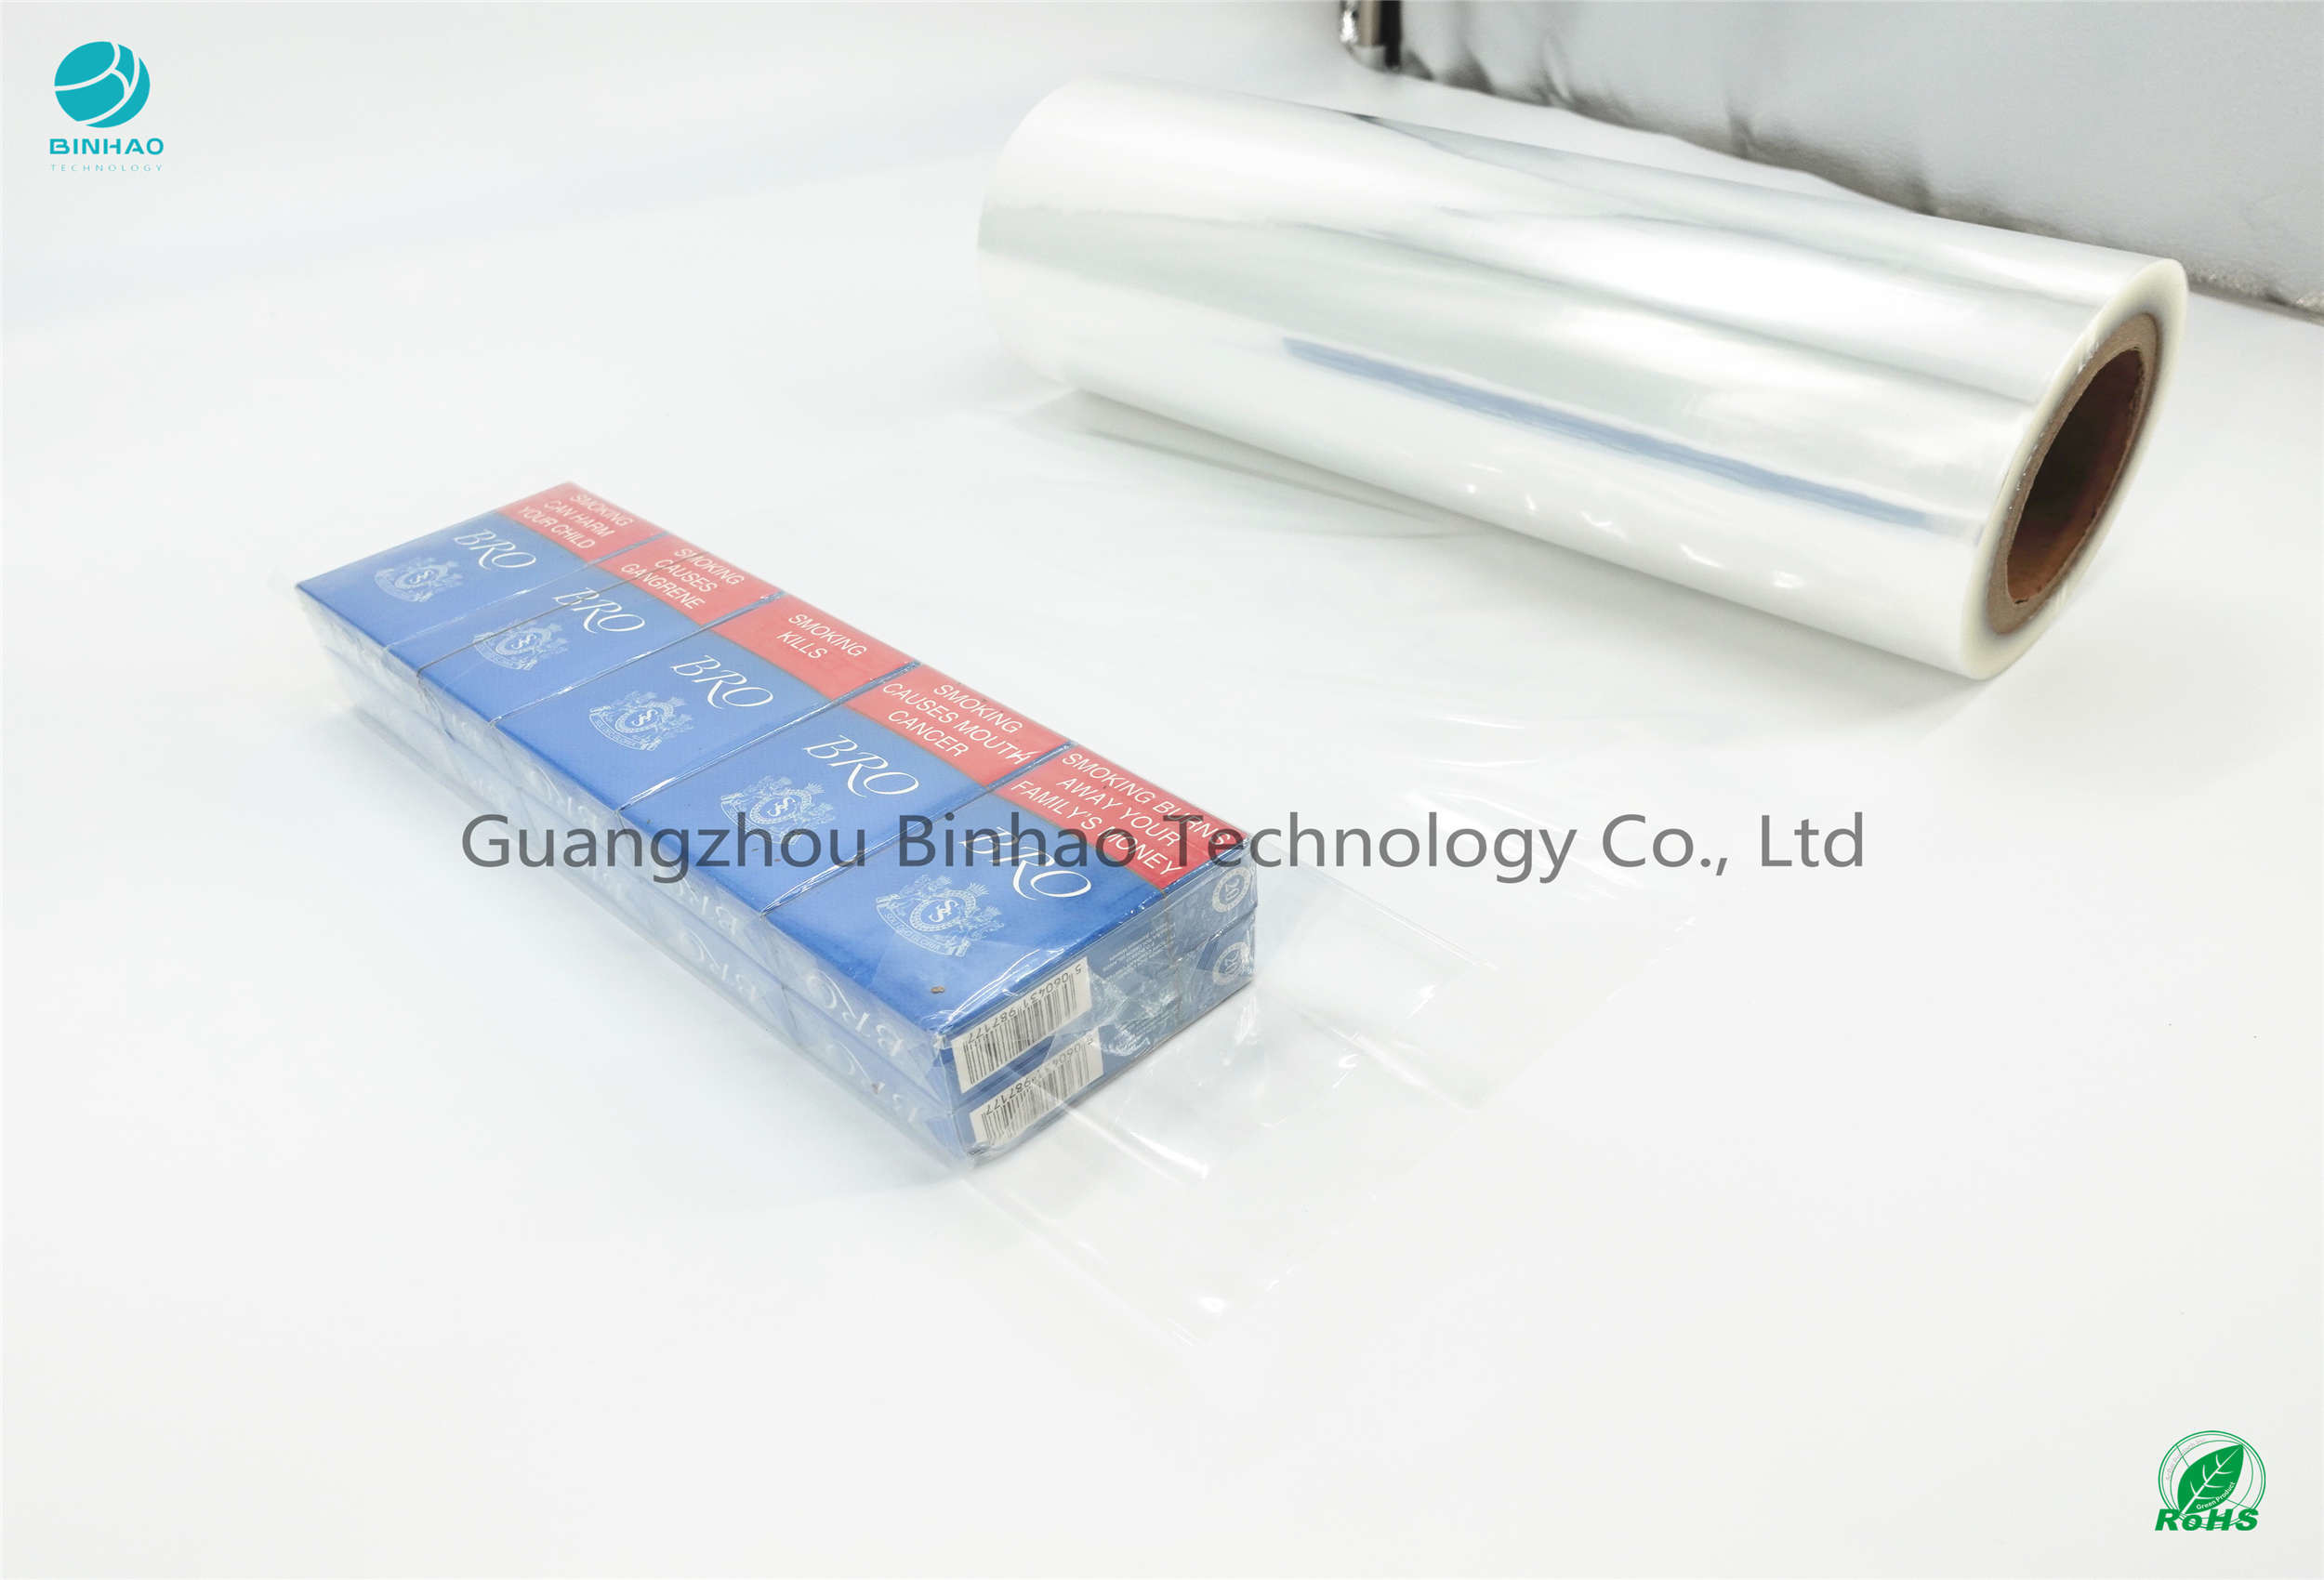 Translucent Smooth 88.67٪ Tobacco PVC Packaging Film